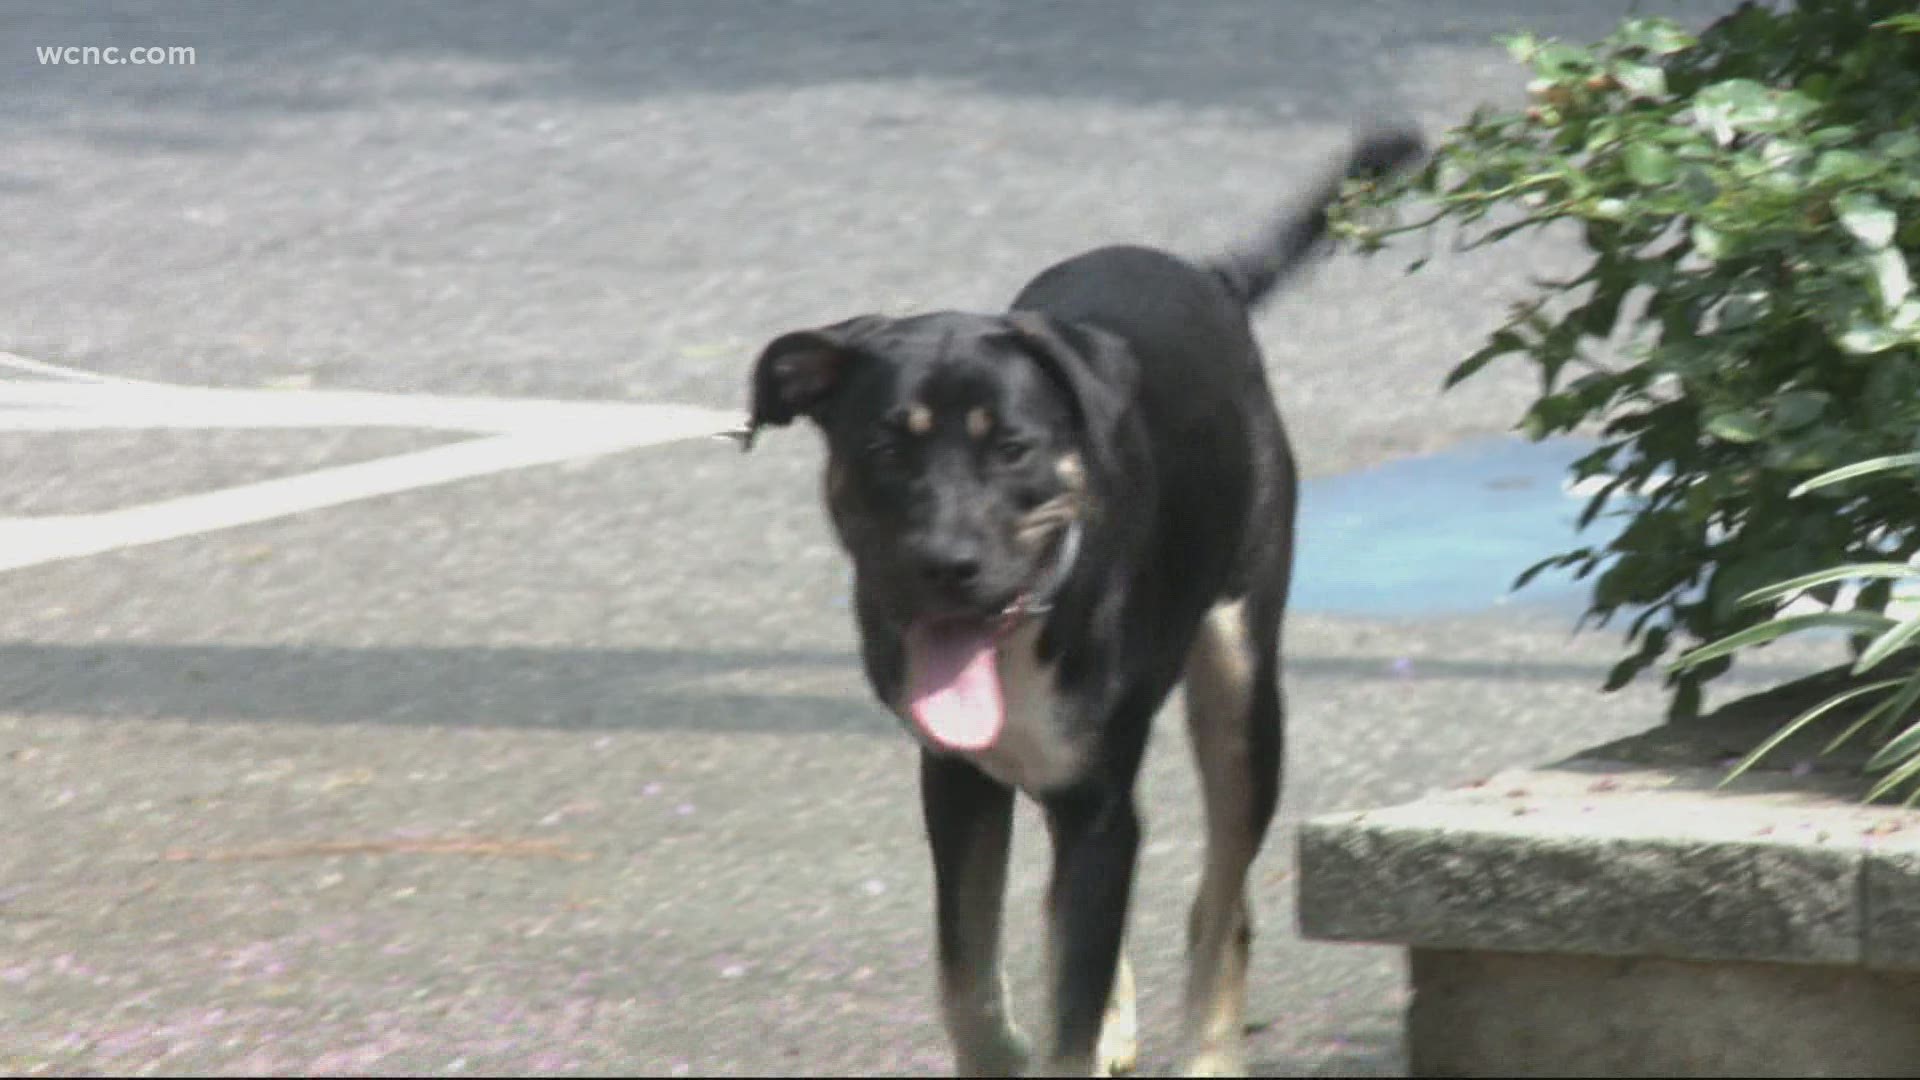 The 'Paw-lympics' event is aimed at promoting adoption at local shelters.